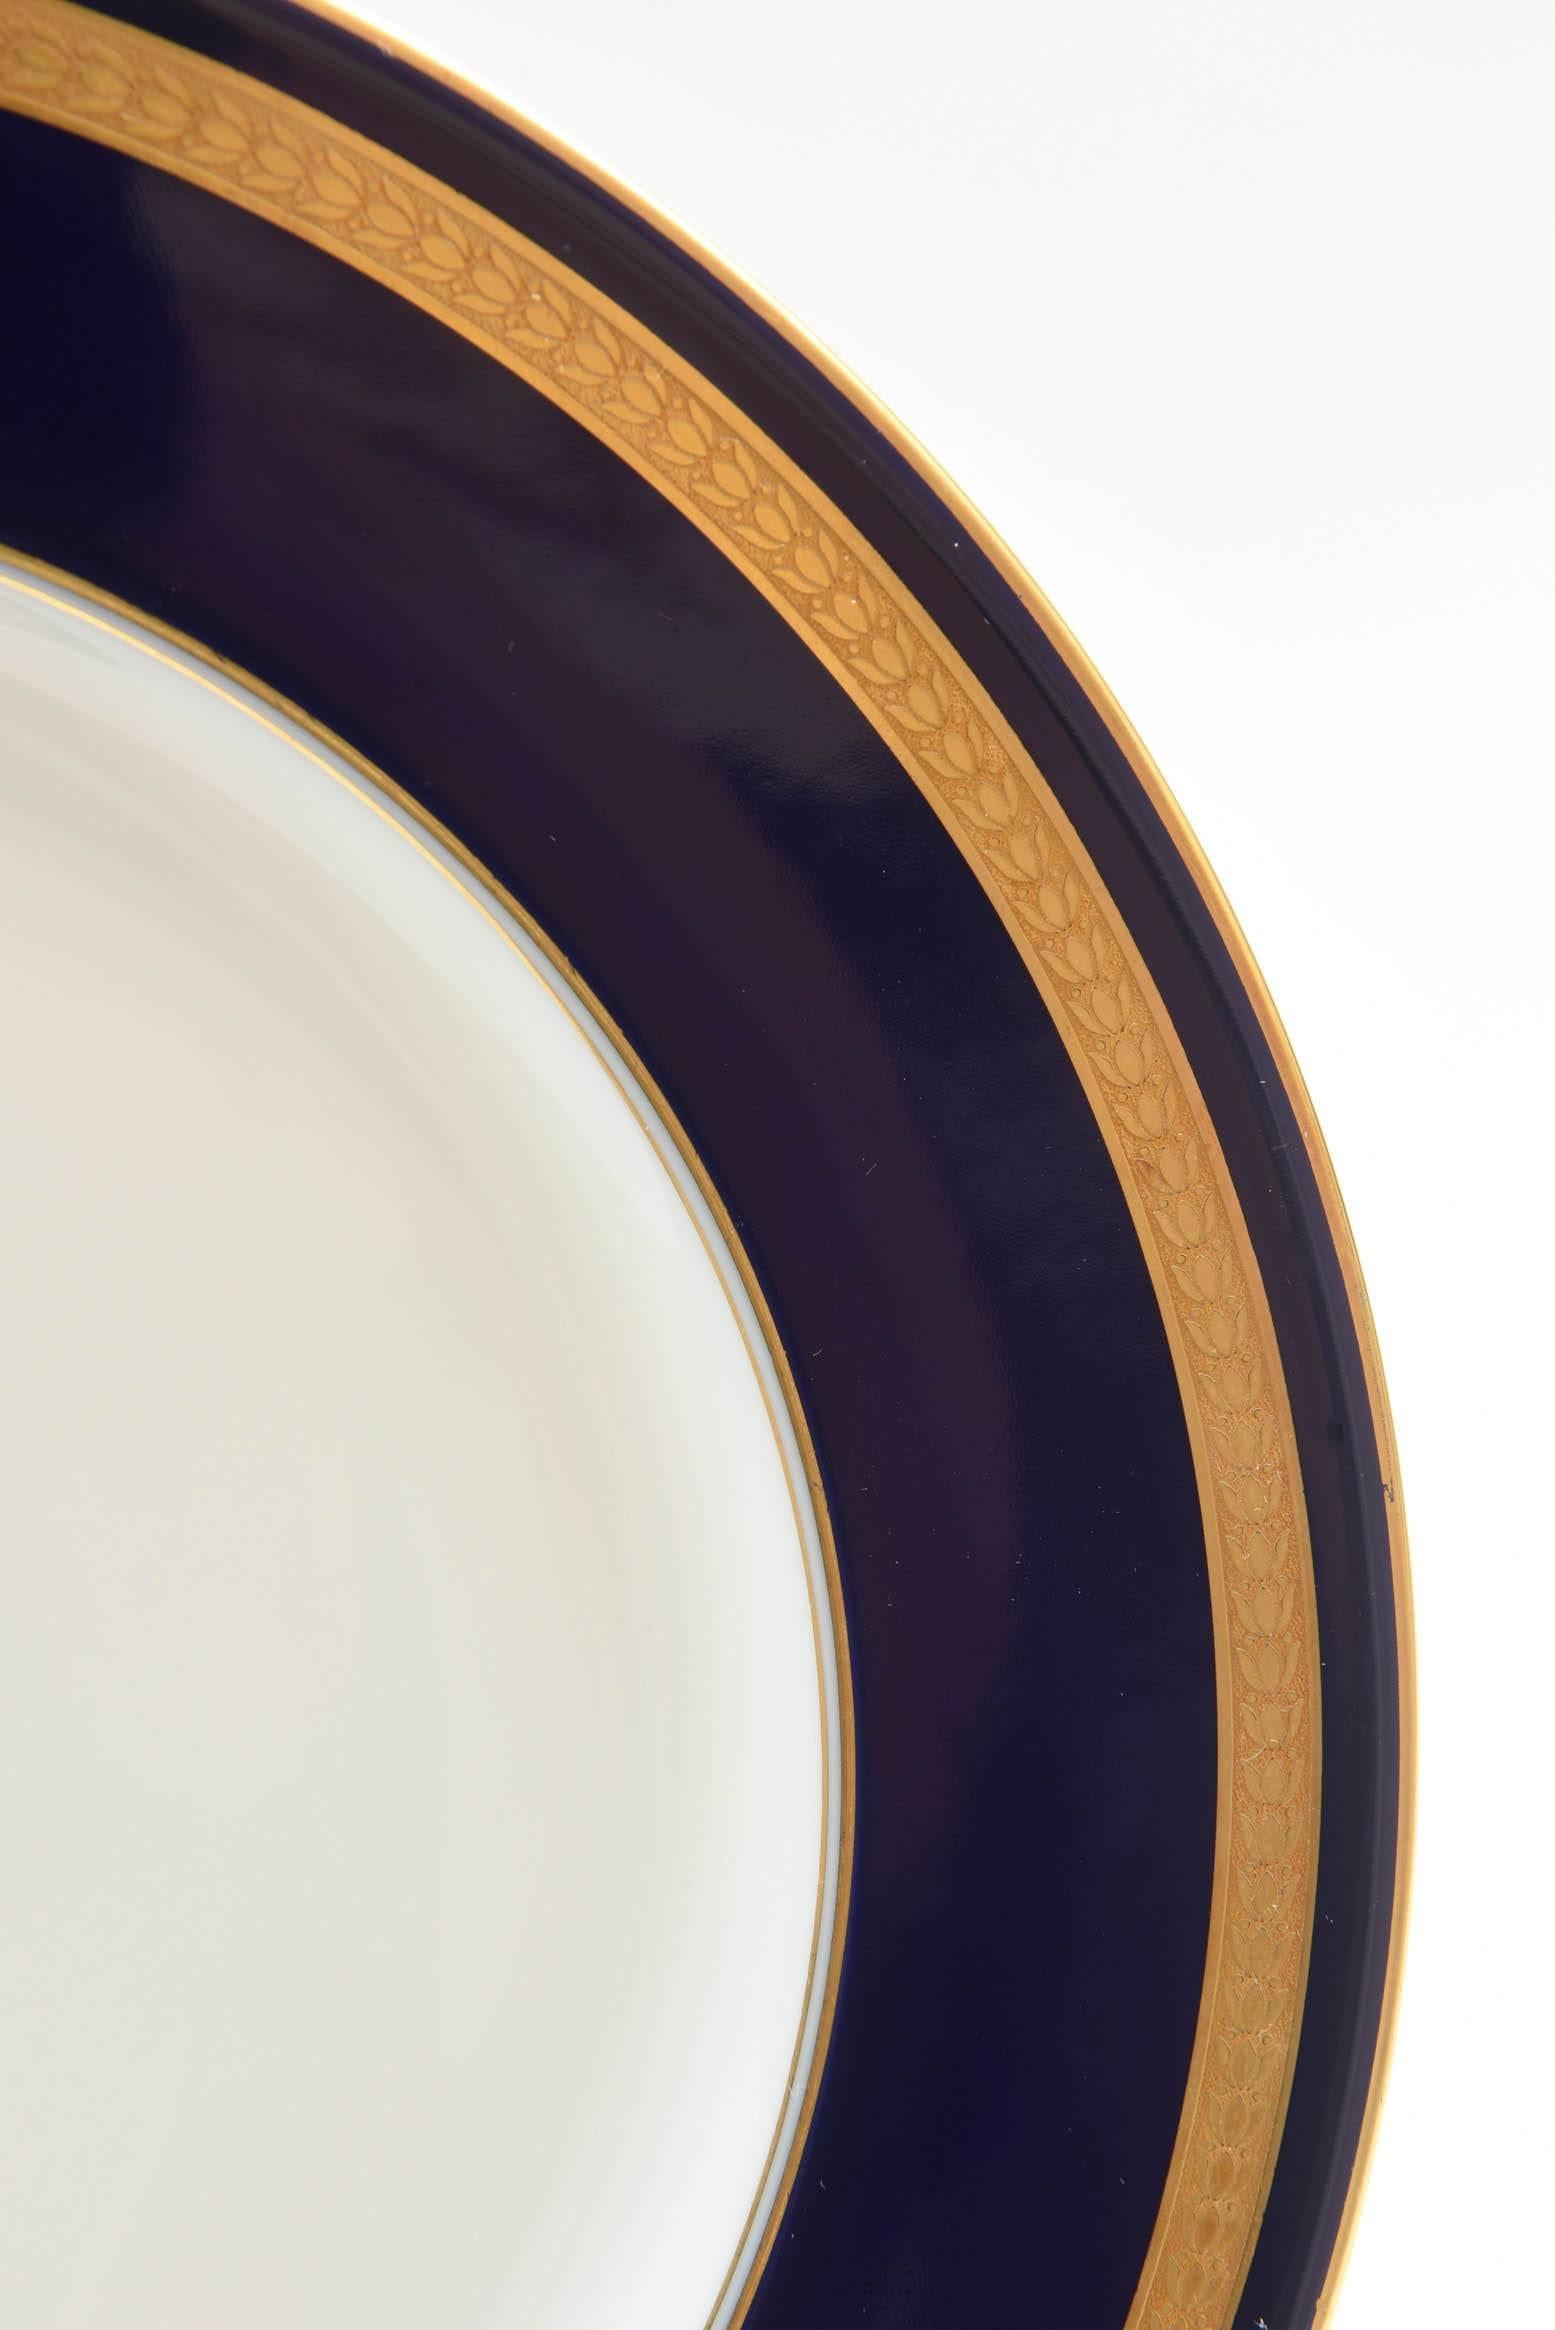 Rosenthal's Classic and elegant pattern. We have here eight dinner plates in wonderful vintage condition. This re known pattern features an acid etched gilt band through a wide cobalt blue shoulder.